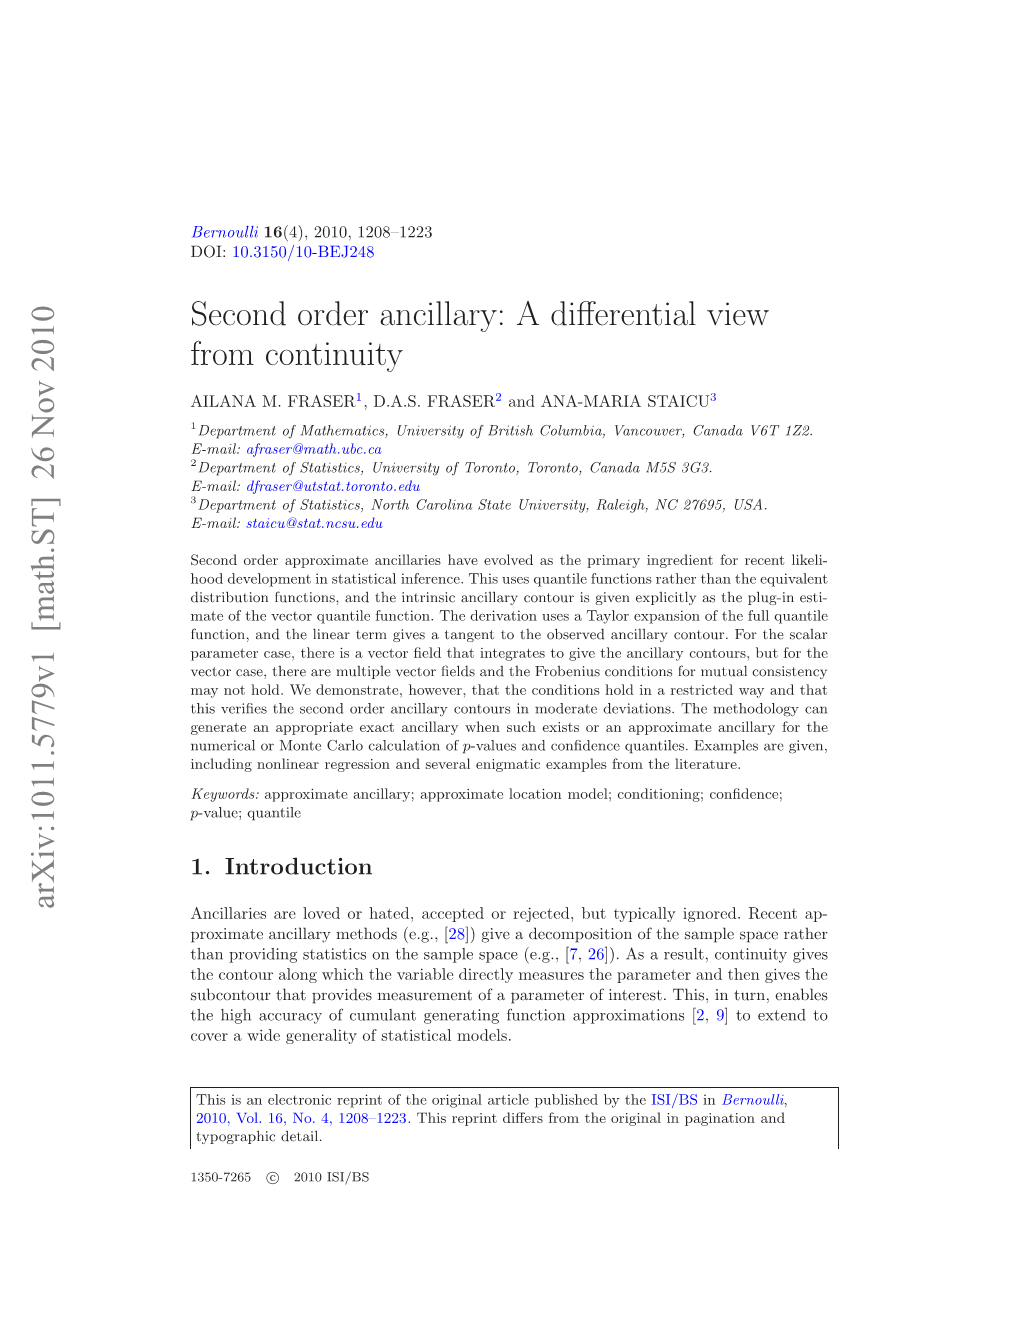 Second Order Ancillary: a Differential View from Continuity